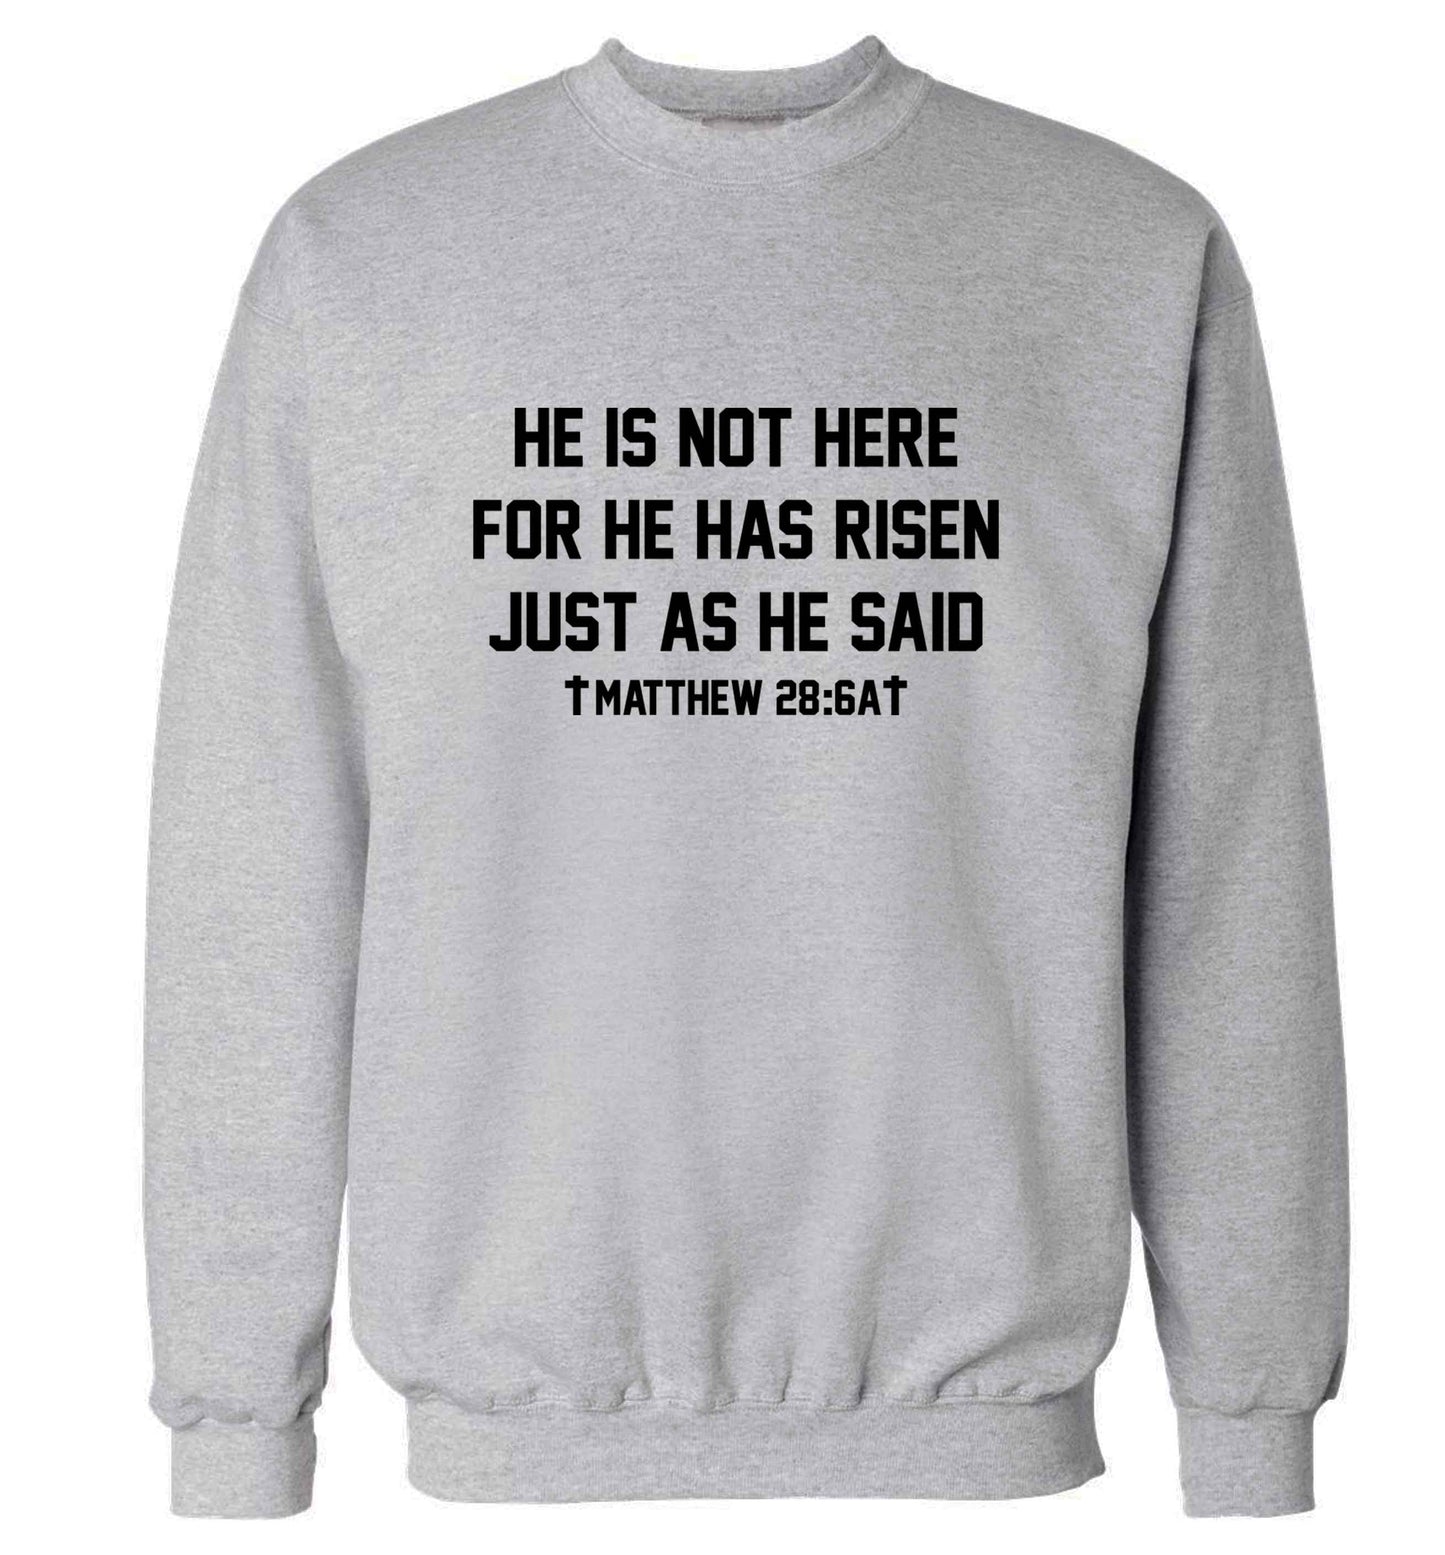 He is not here for he has risen just as he said matthew 28:6A adult's unisex grey sweater 2XL